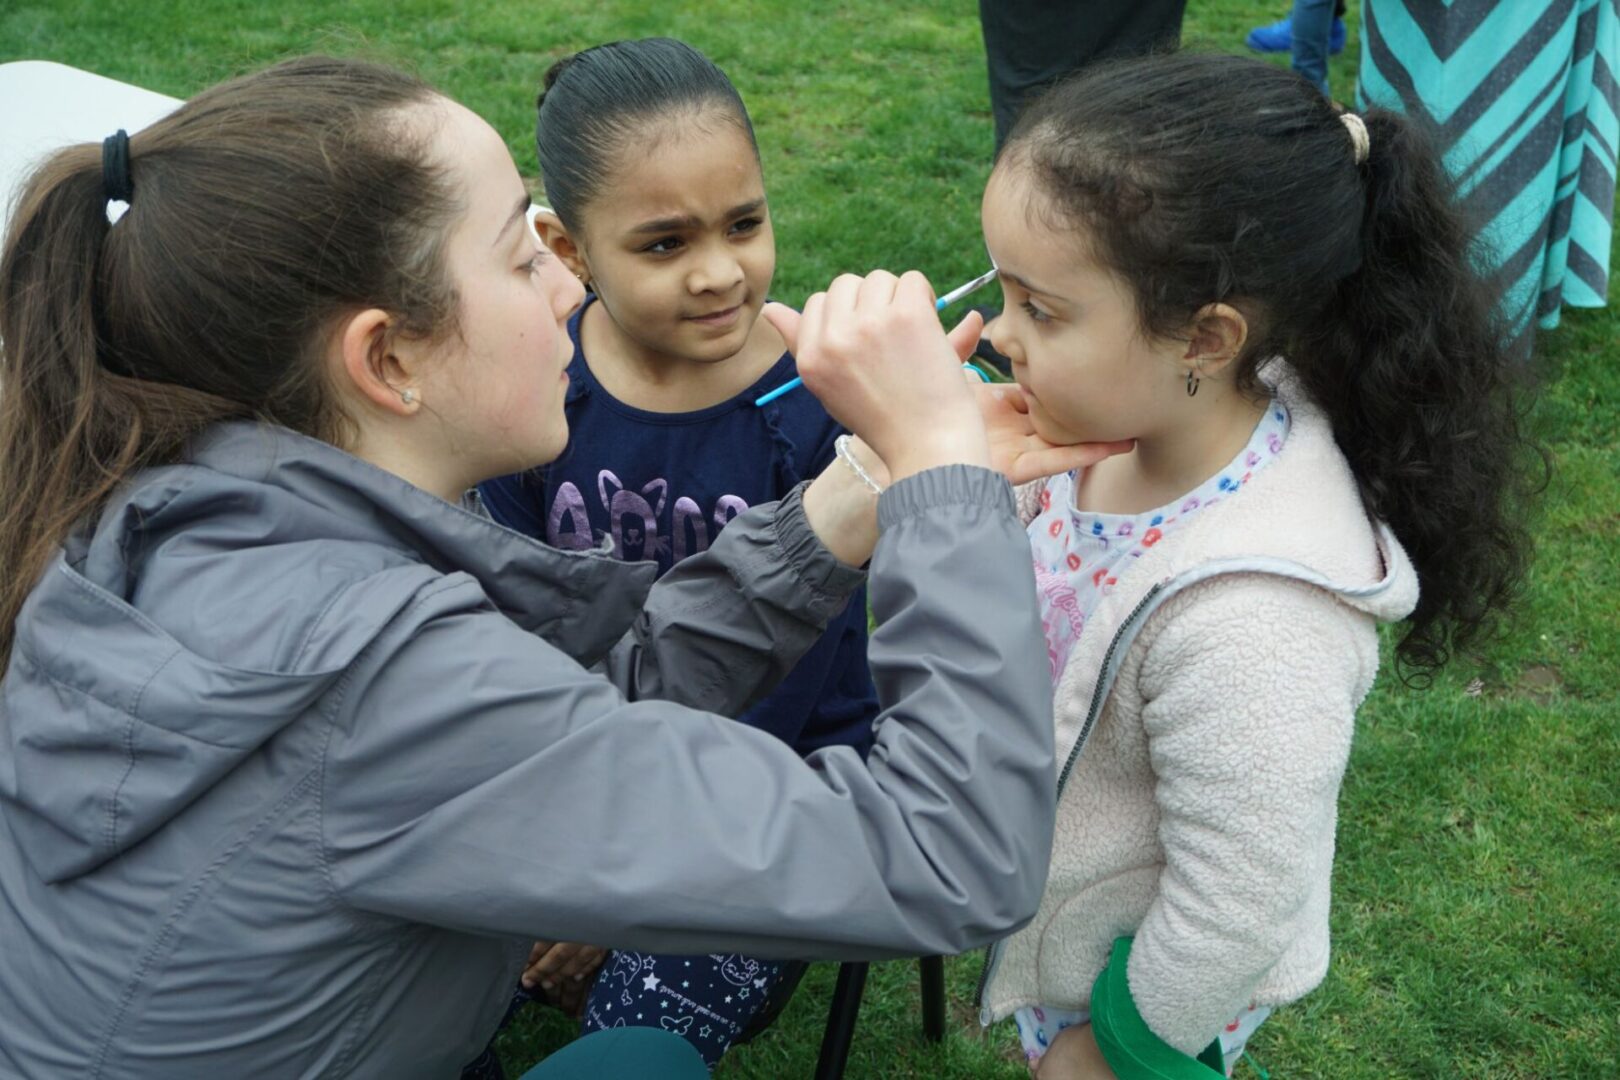 A girl sitting and watching another girl being face painted